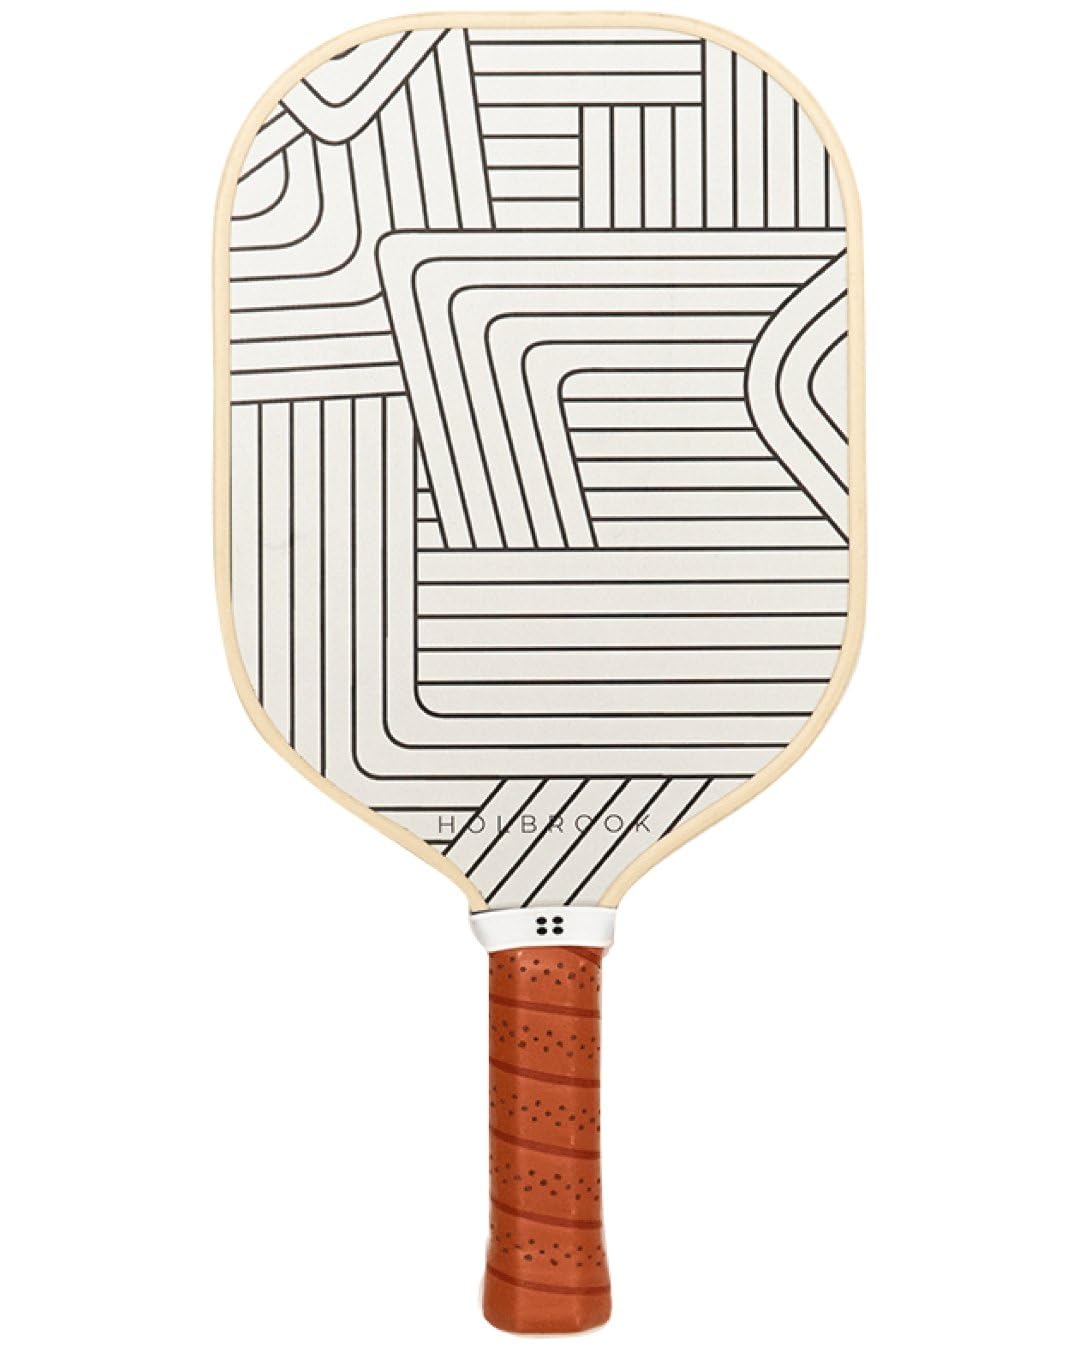 The Holbrook Centre Court Paddle